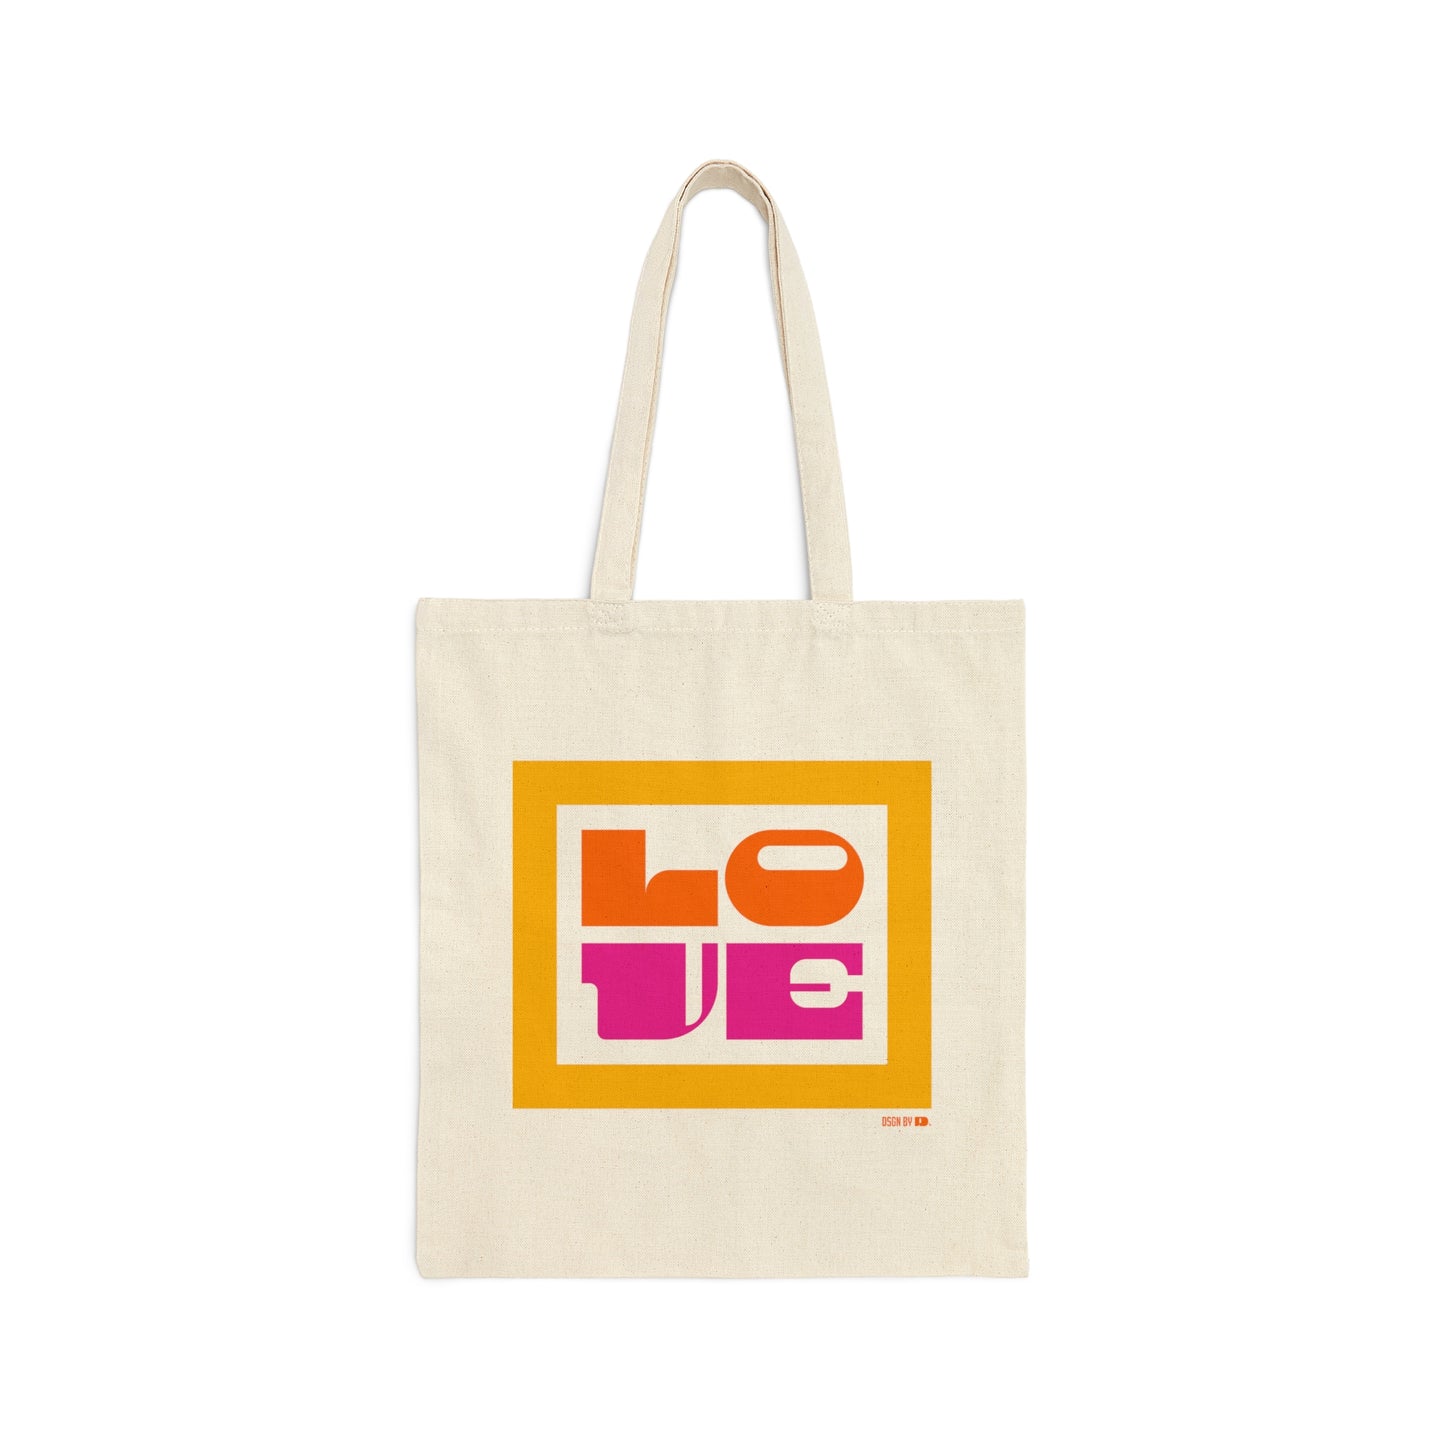 A antique white cotton canvas tote bag with yellow, orange, and pink design.